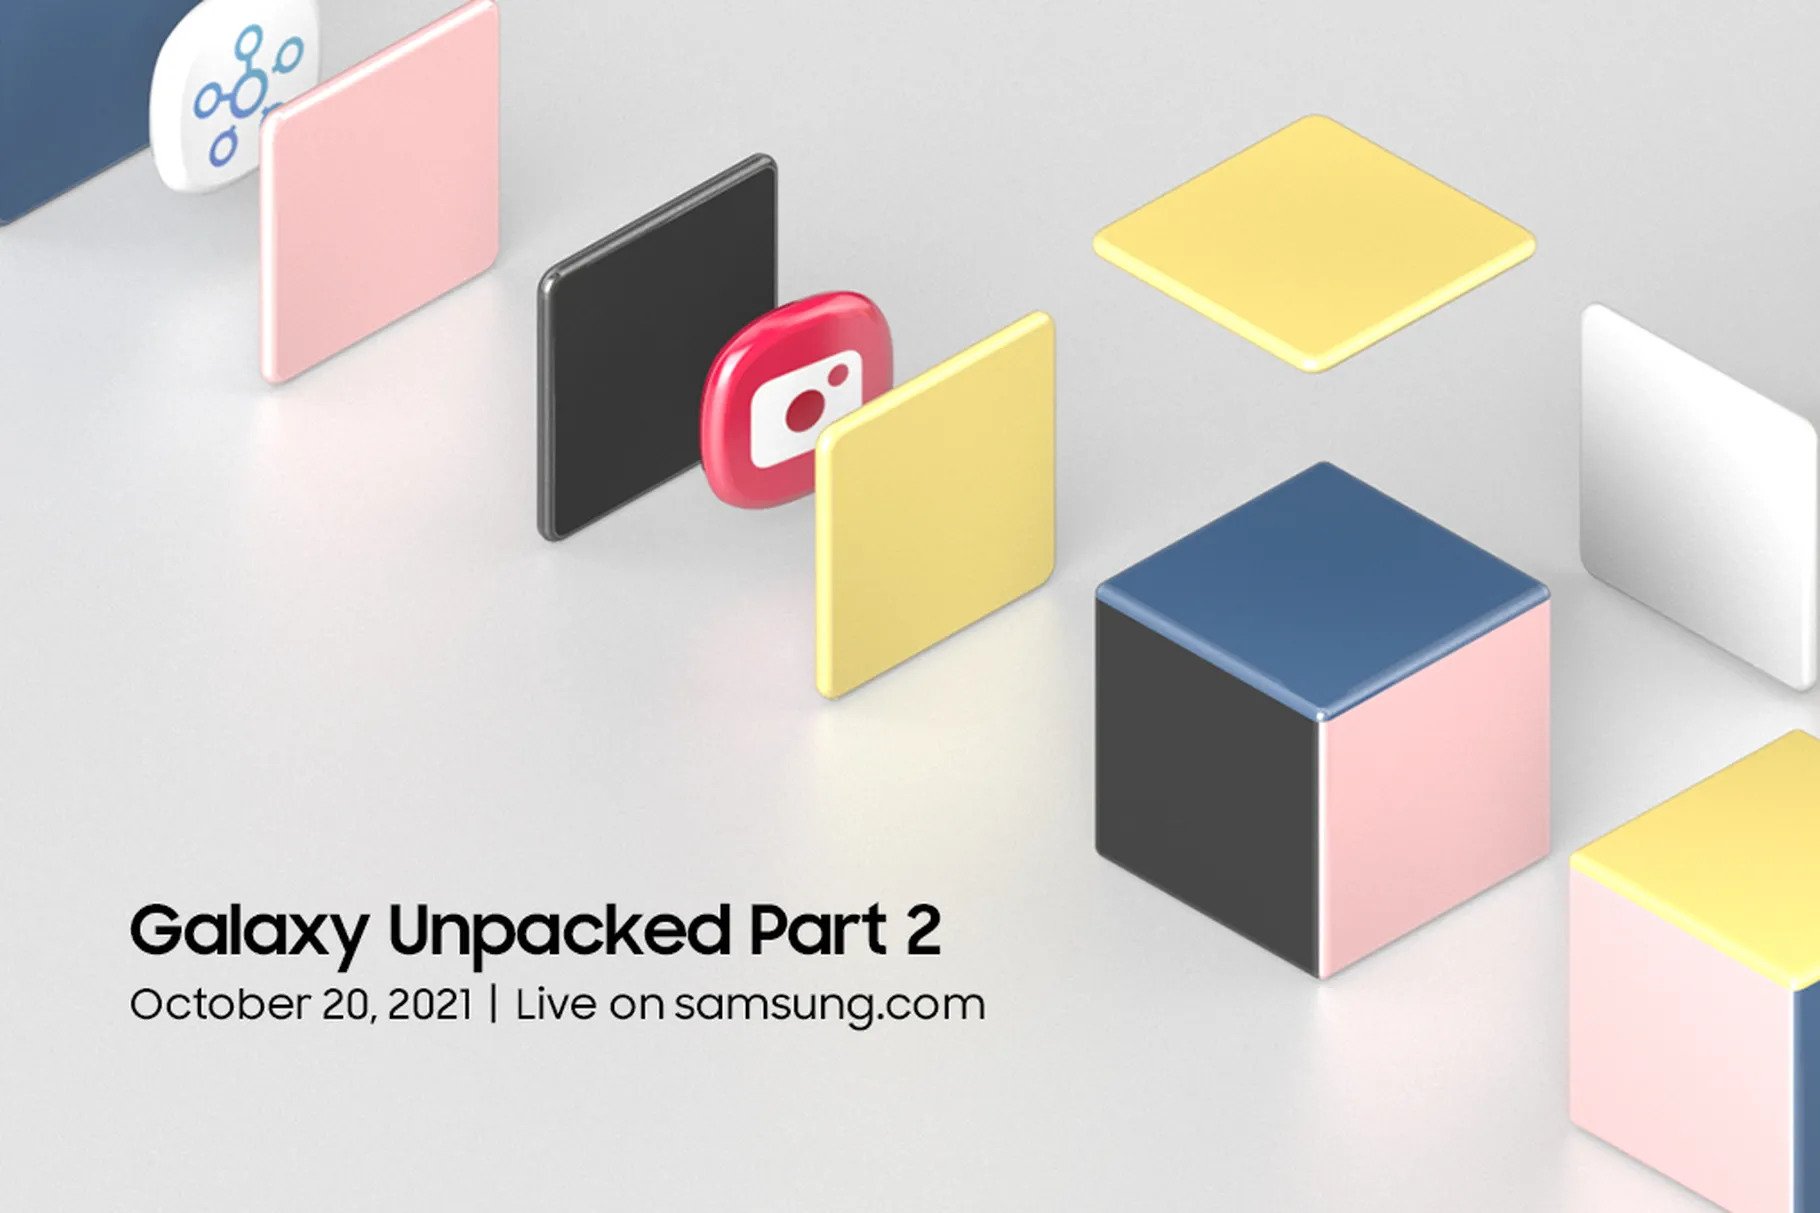 Samsung has announced the Galaxy Unpacked Part 2 presentation, it will be held on October 20